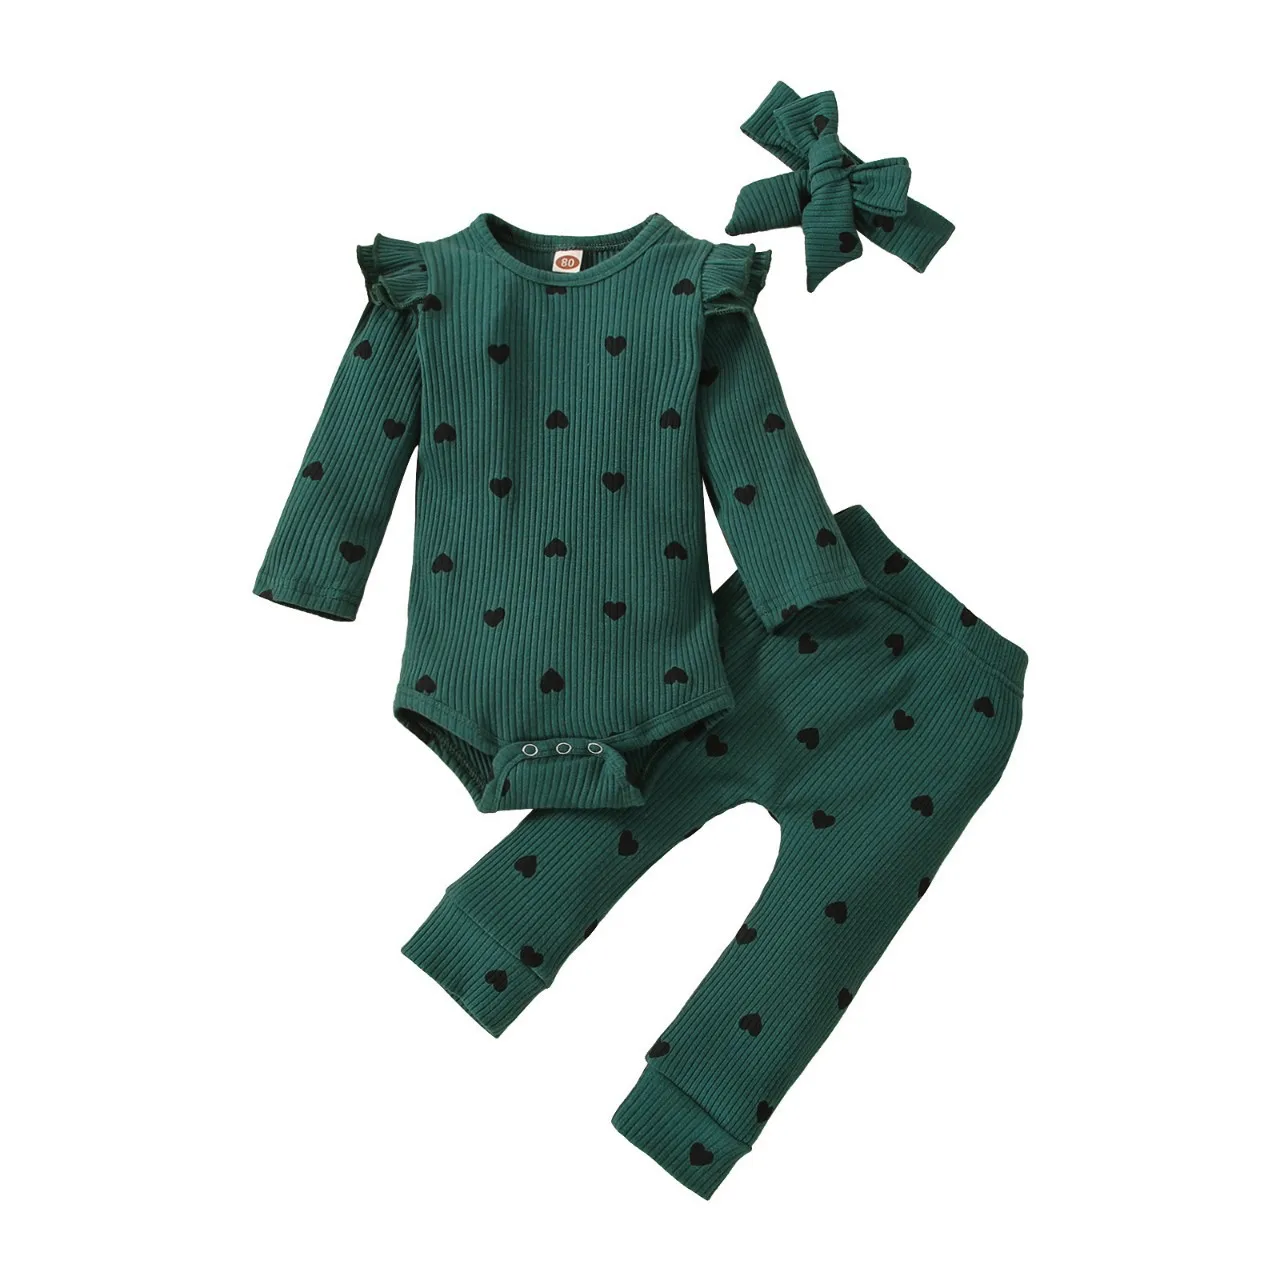 Prowow 0-18M 100% Cotton Baby Girl Clothes Set Long Sleeve Bodysuit Romper and Ruffles Pants Solid Baby Girl Outfit Newborn baby floral clothing set Baby Clothing Set